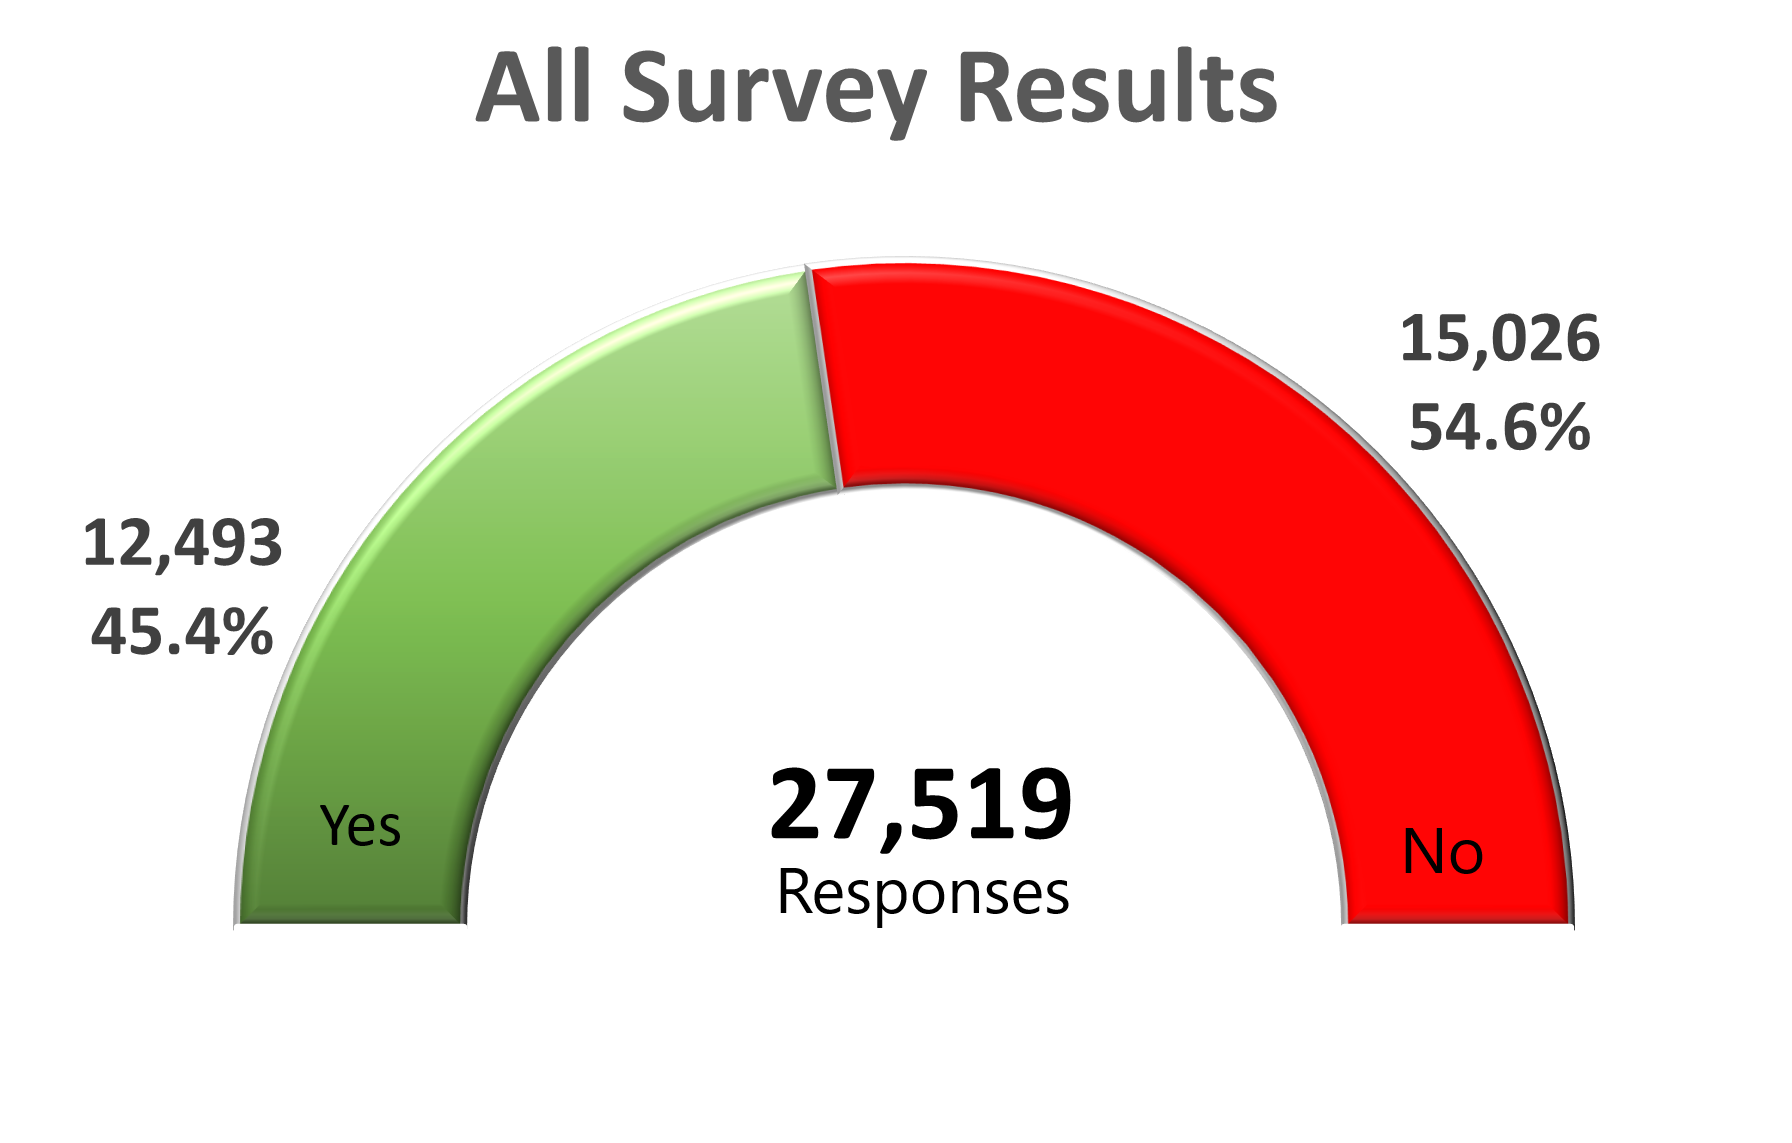 All survey results